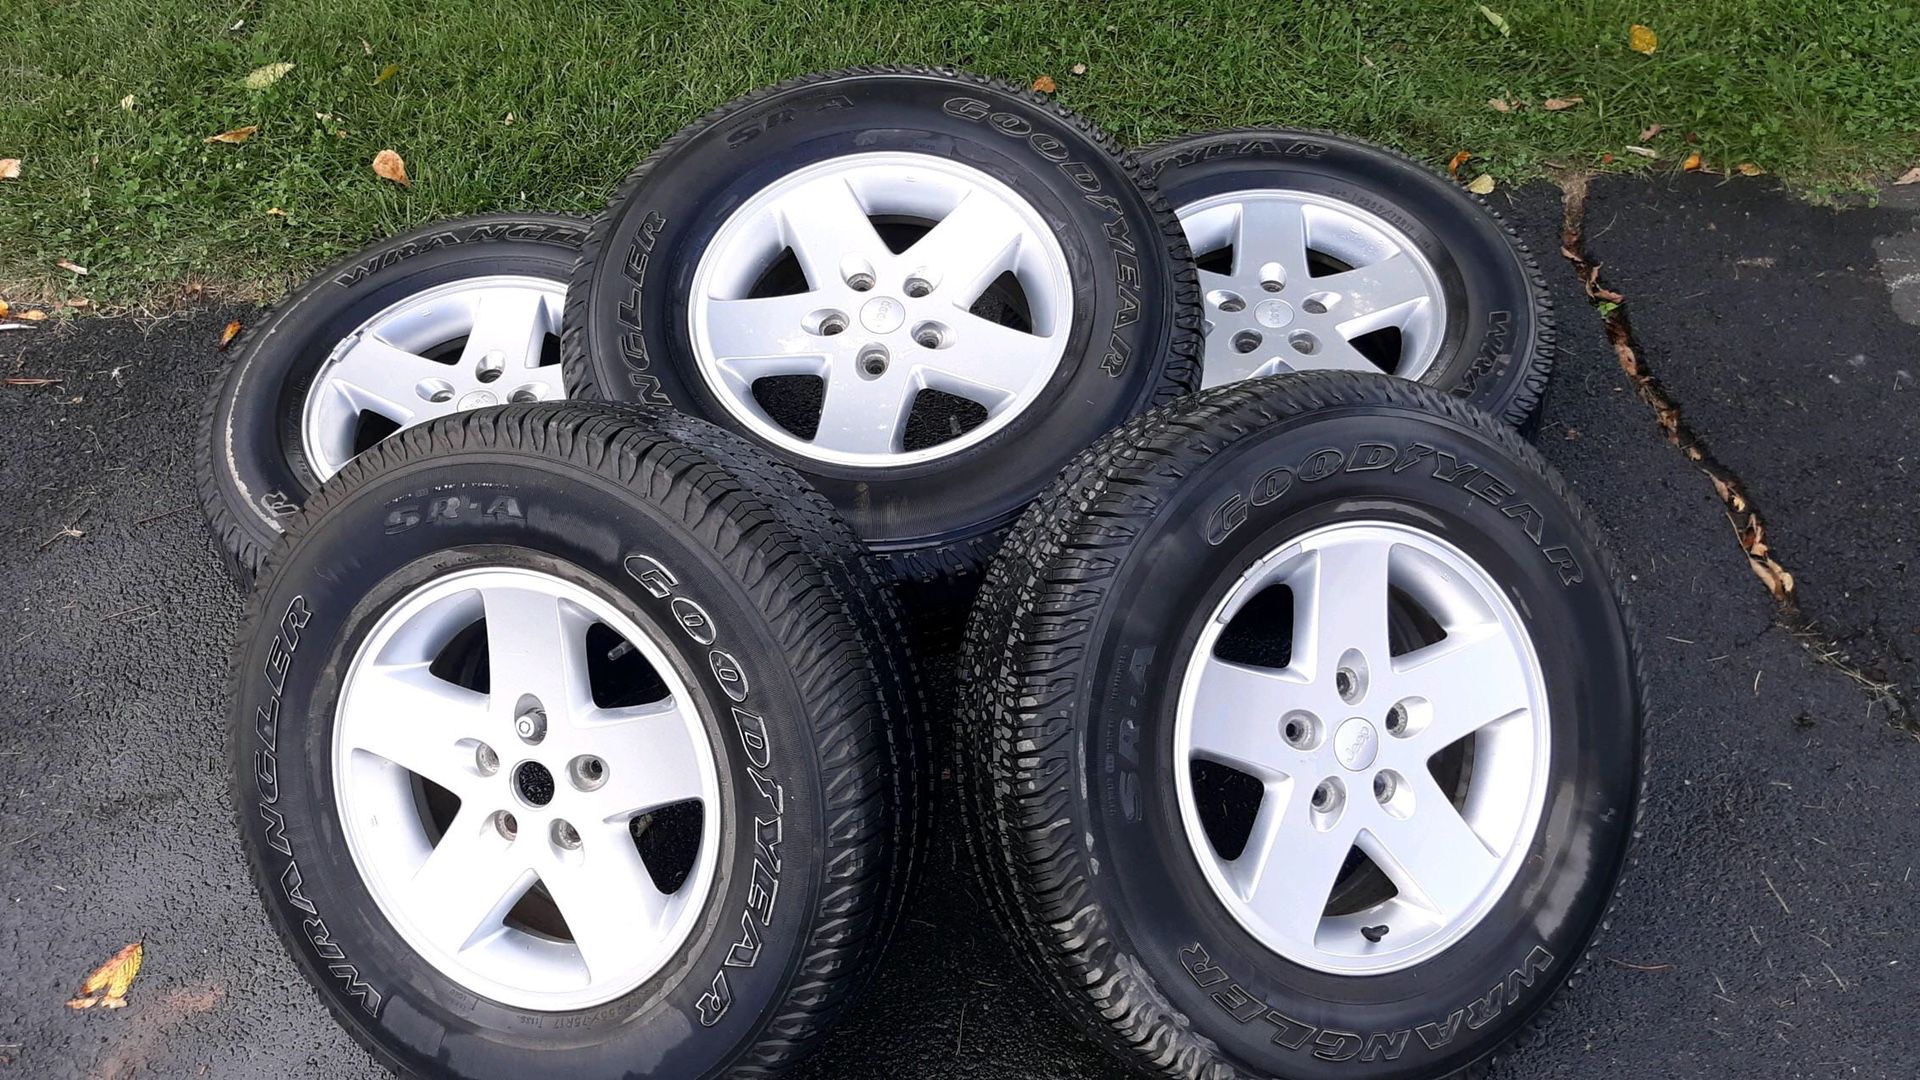 5 Jeep Wheels and Tires 255/75 17